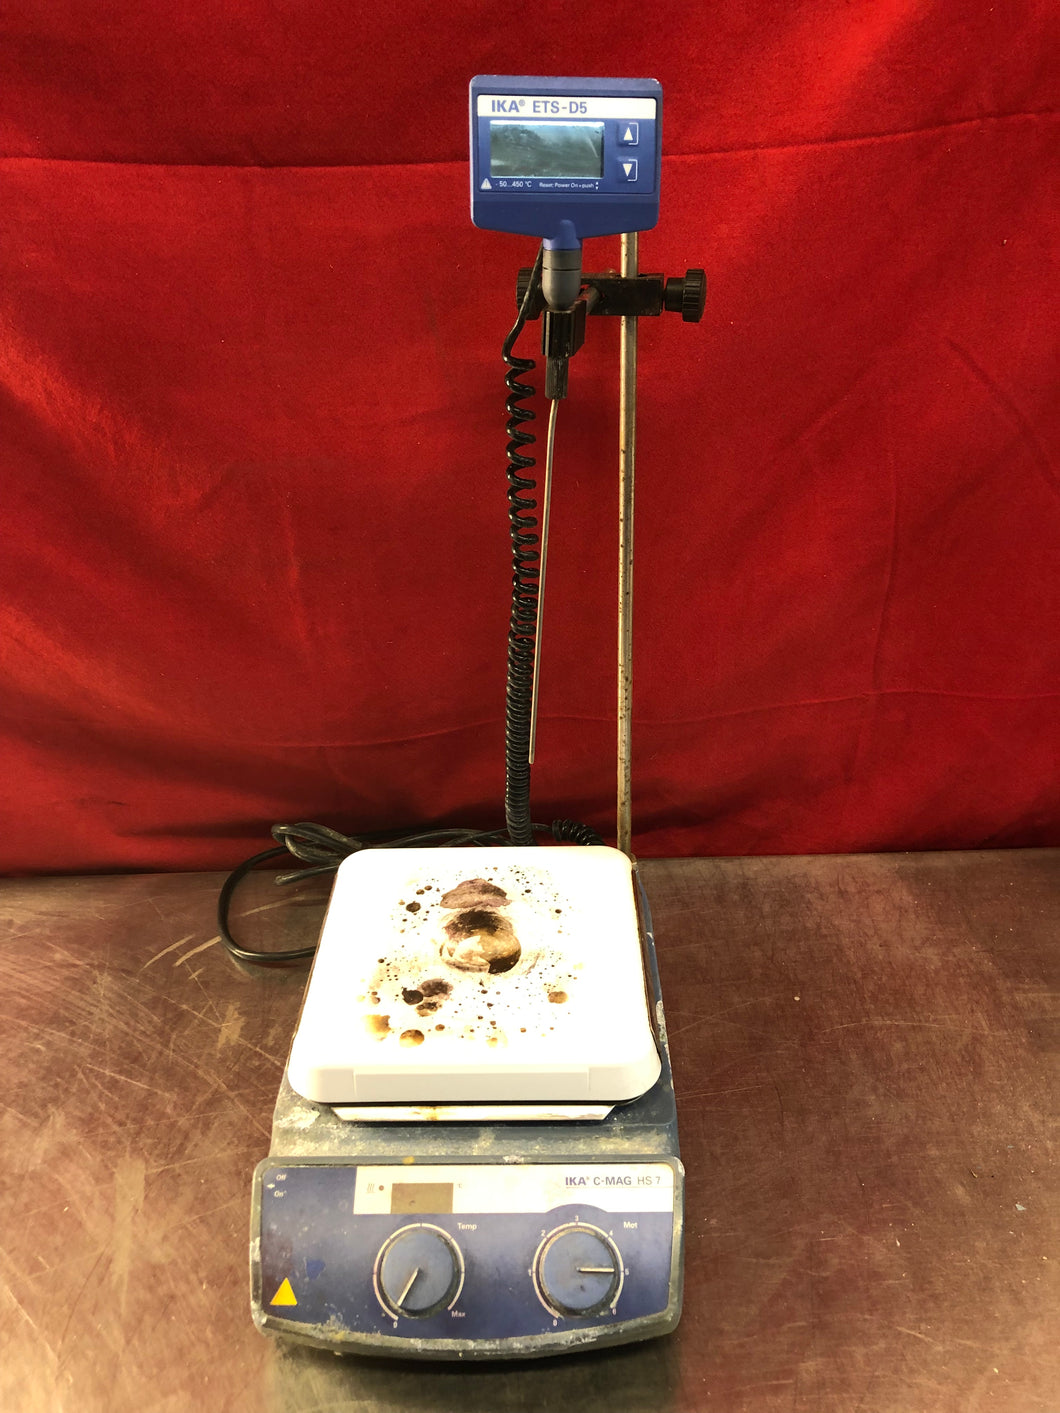 IKA C-Mag HS 7 Hotplate w/ ETS-D5 Electronic Contact Thermometer - Used